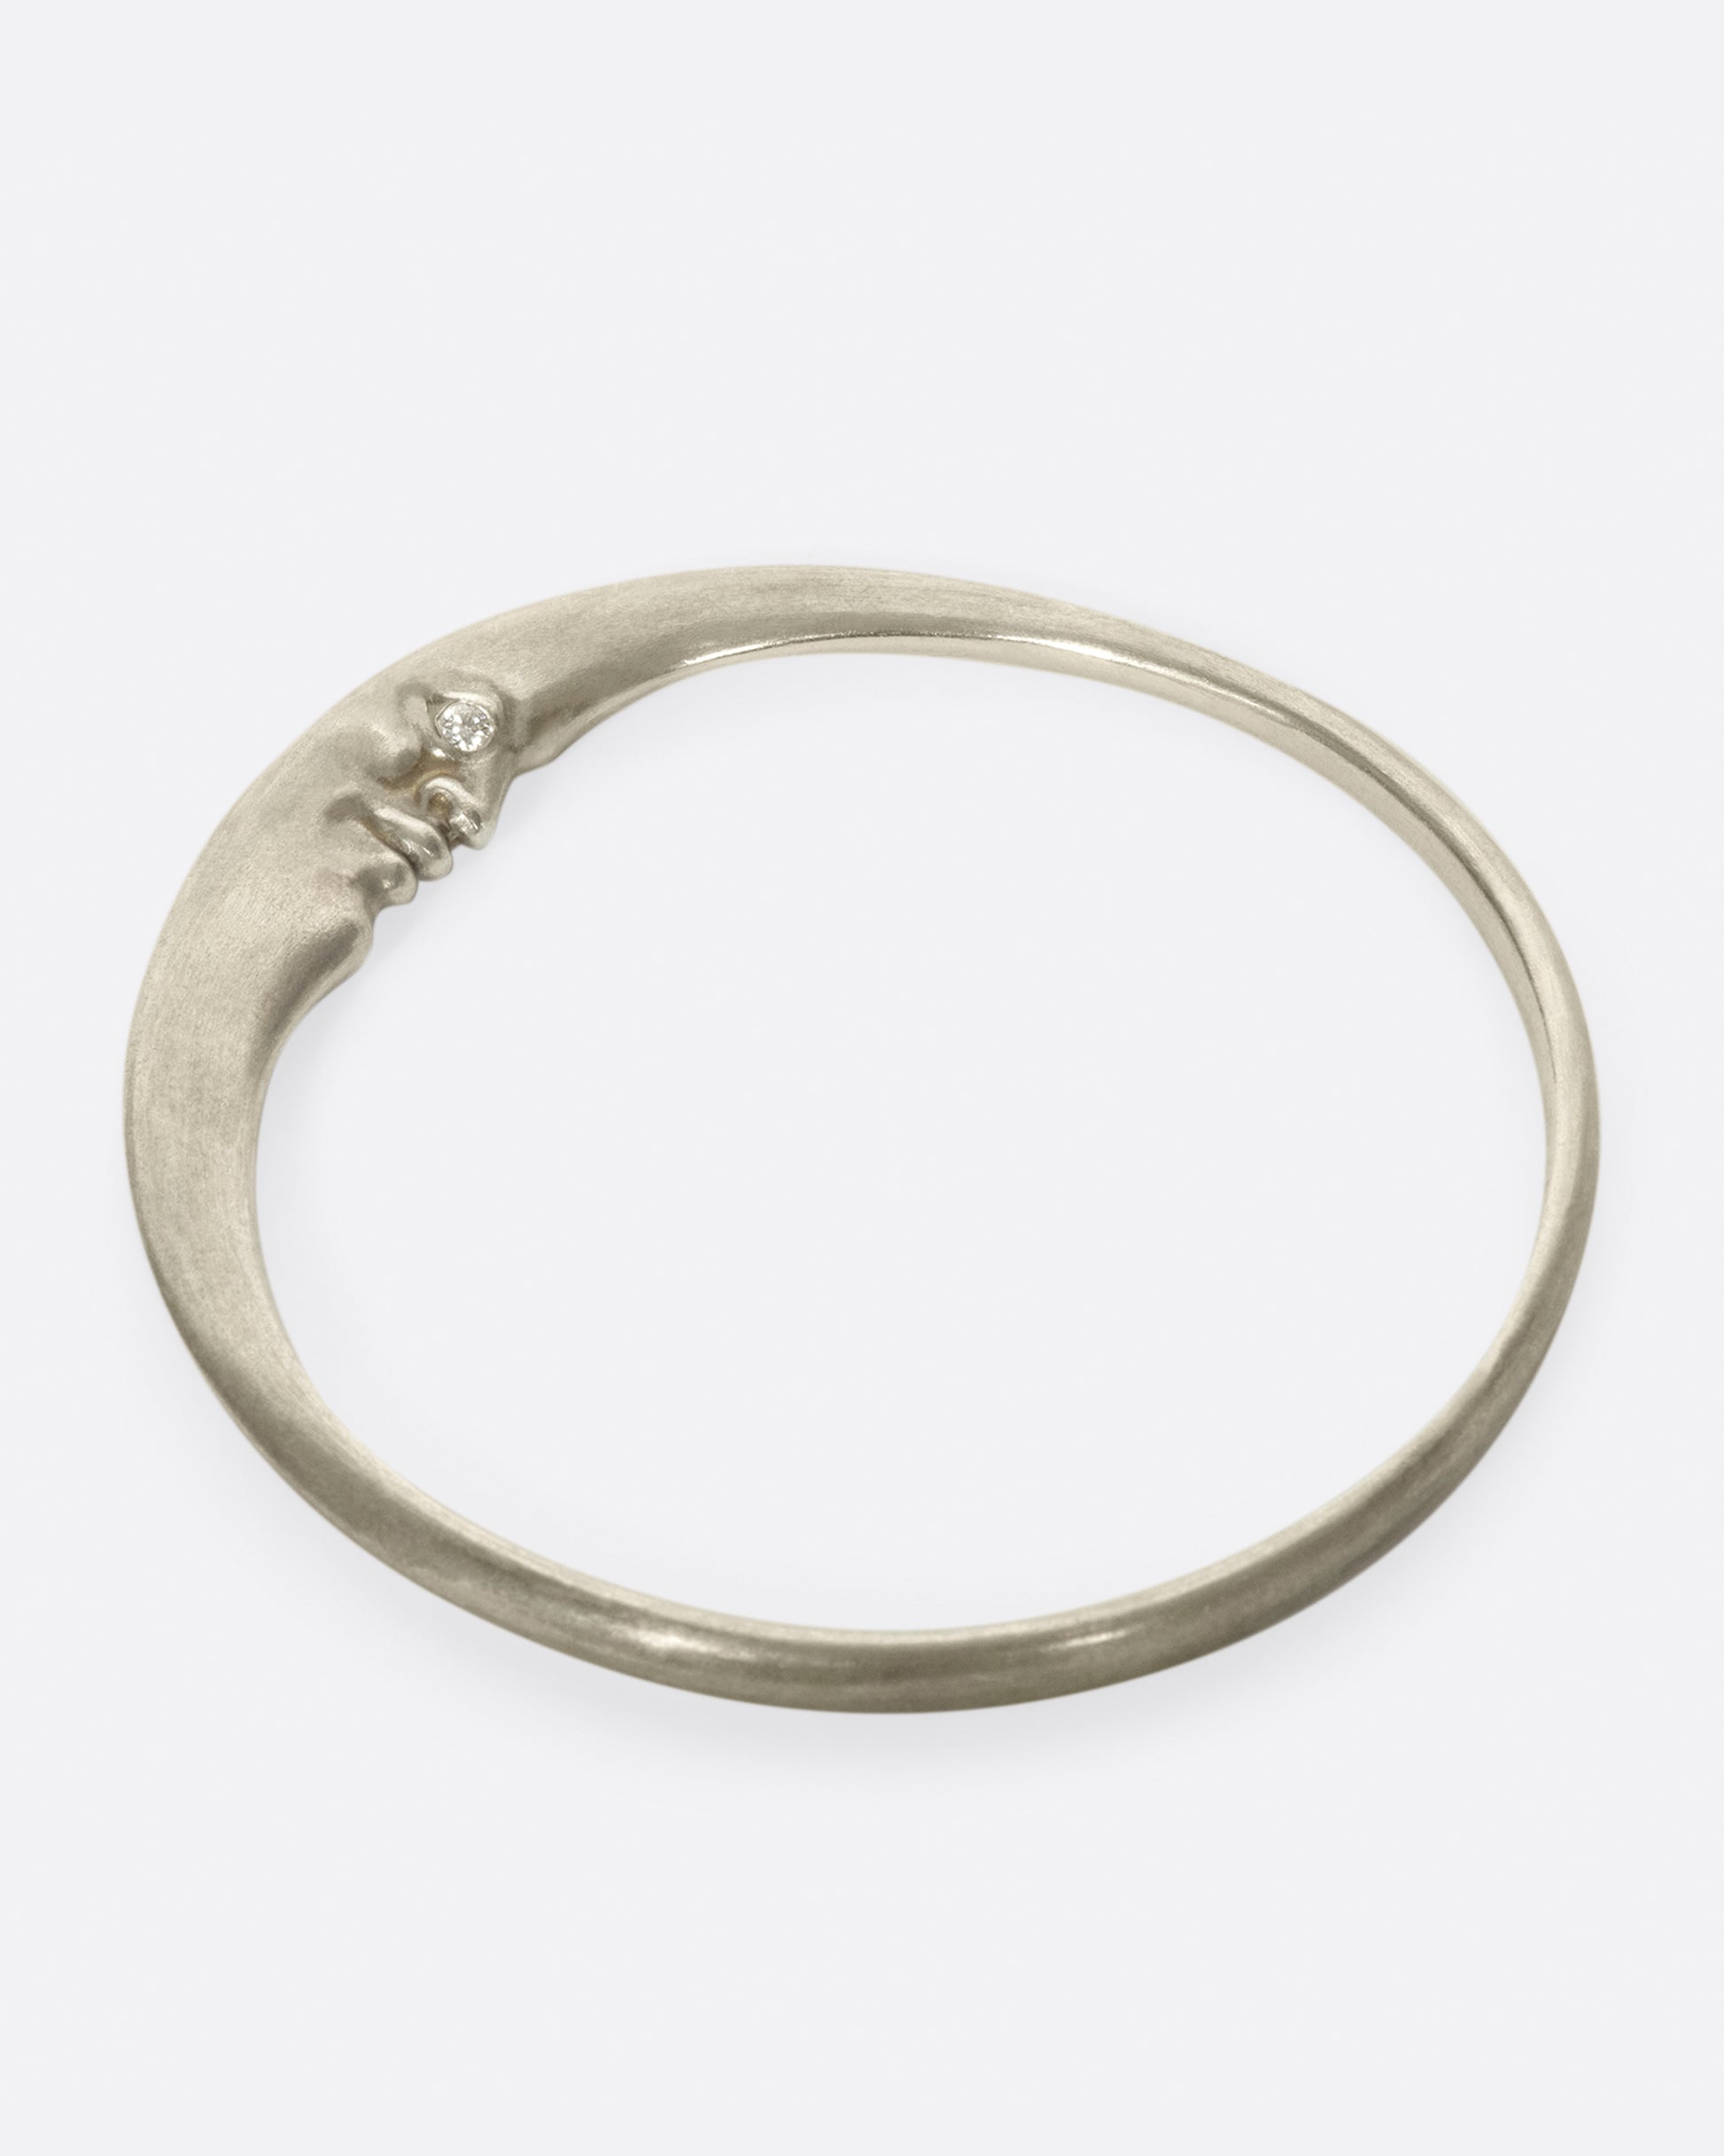 A seemingly simple bangle with a hidden crescent moonface and diamond eyes, only visible from the side.